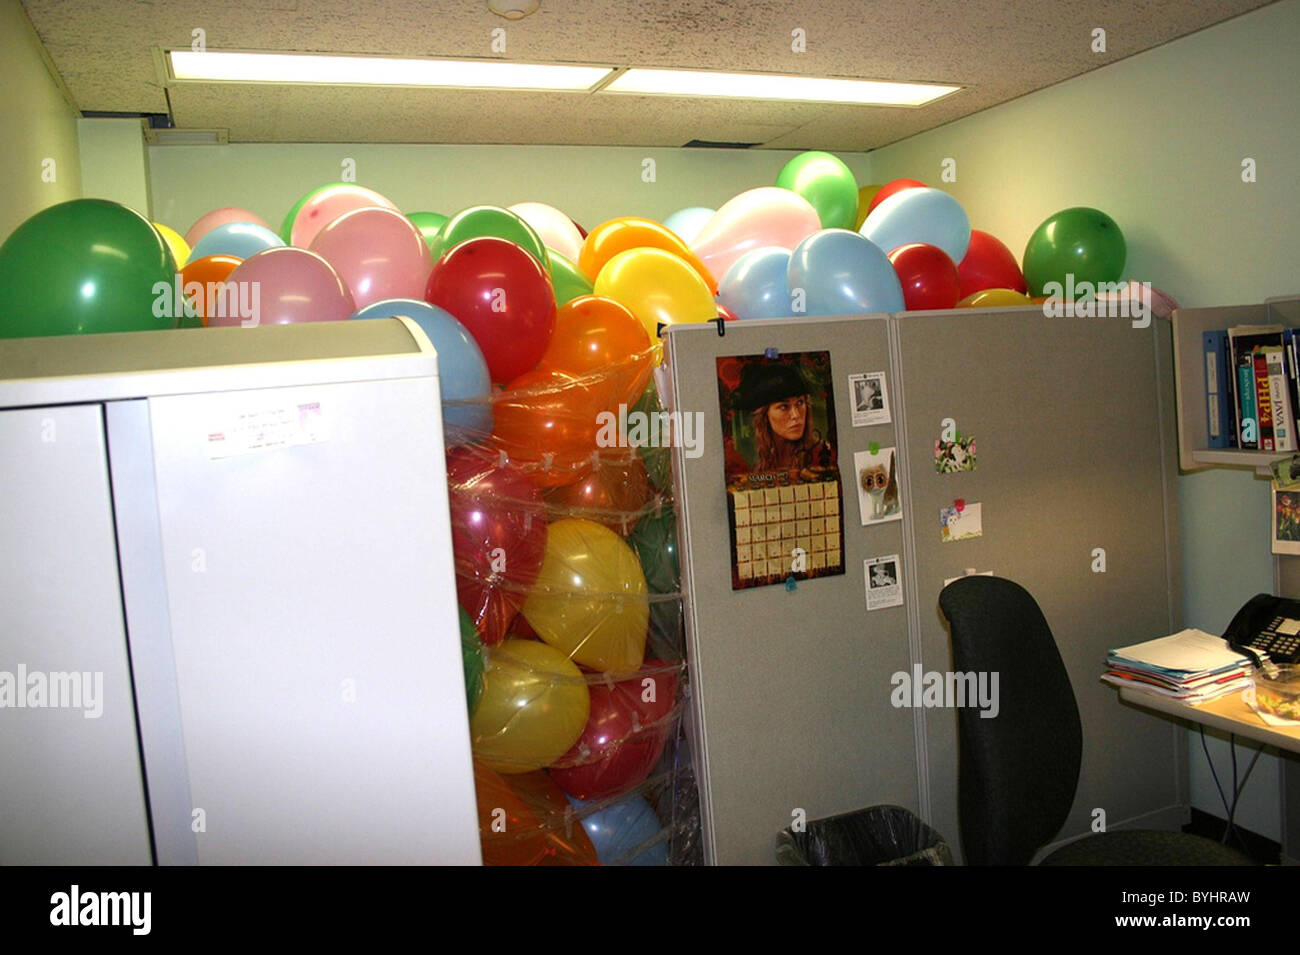 The Office Of Pranks This Is One Office You Certainly Wouldn T